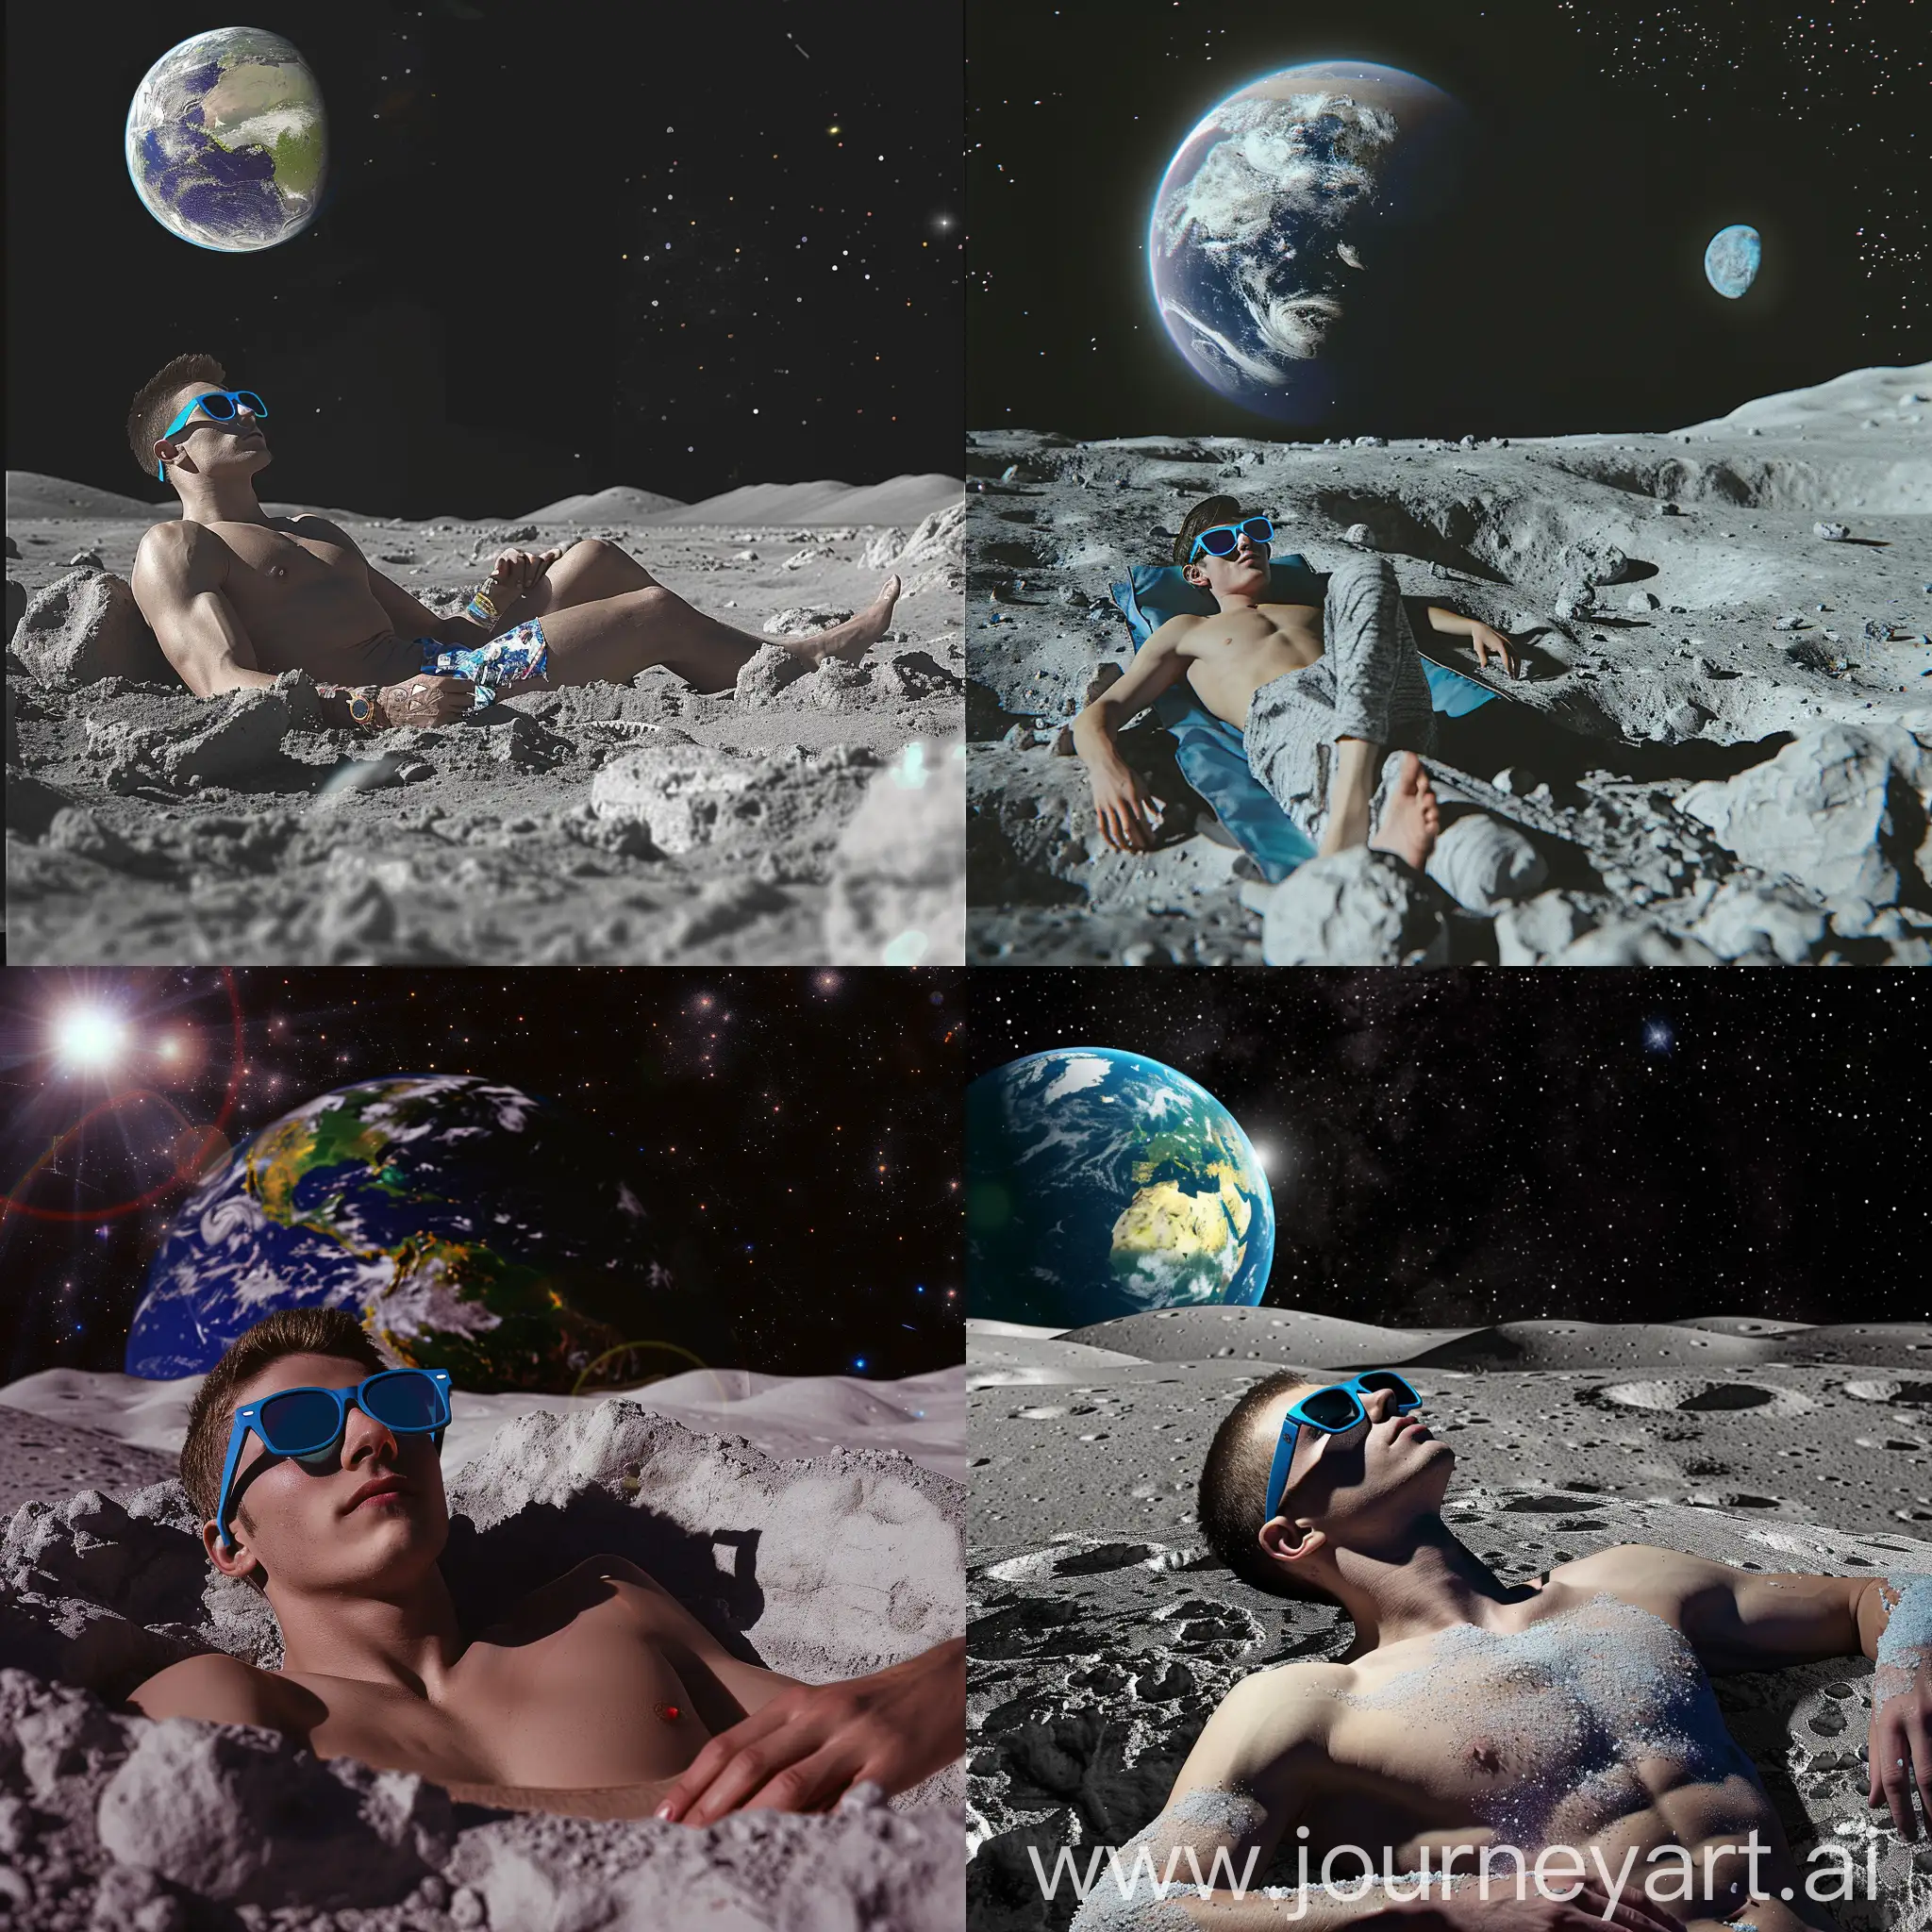 Male-Model-Sunbathing-on-the-Moon-with-Blue-Sunglasses-and-Earth-in-the-Background